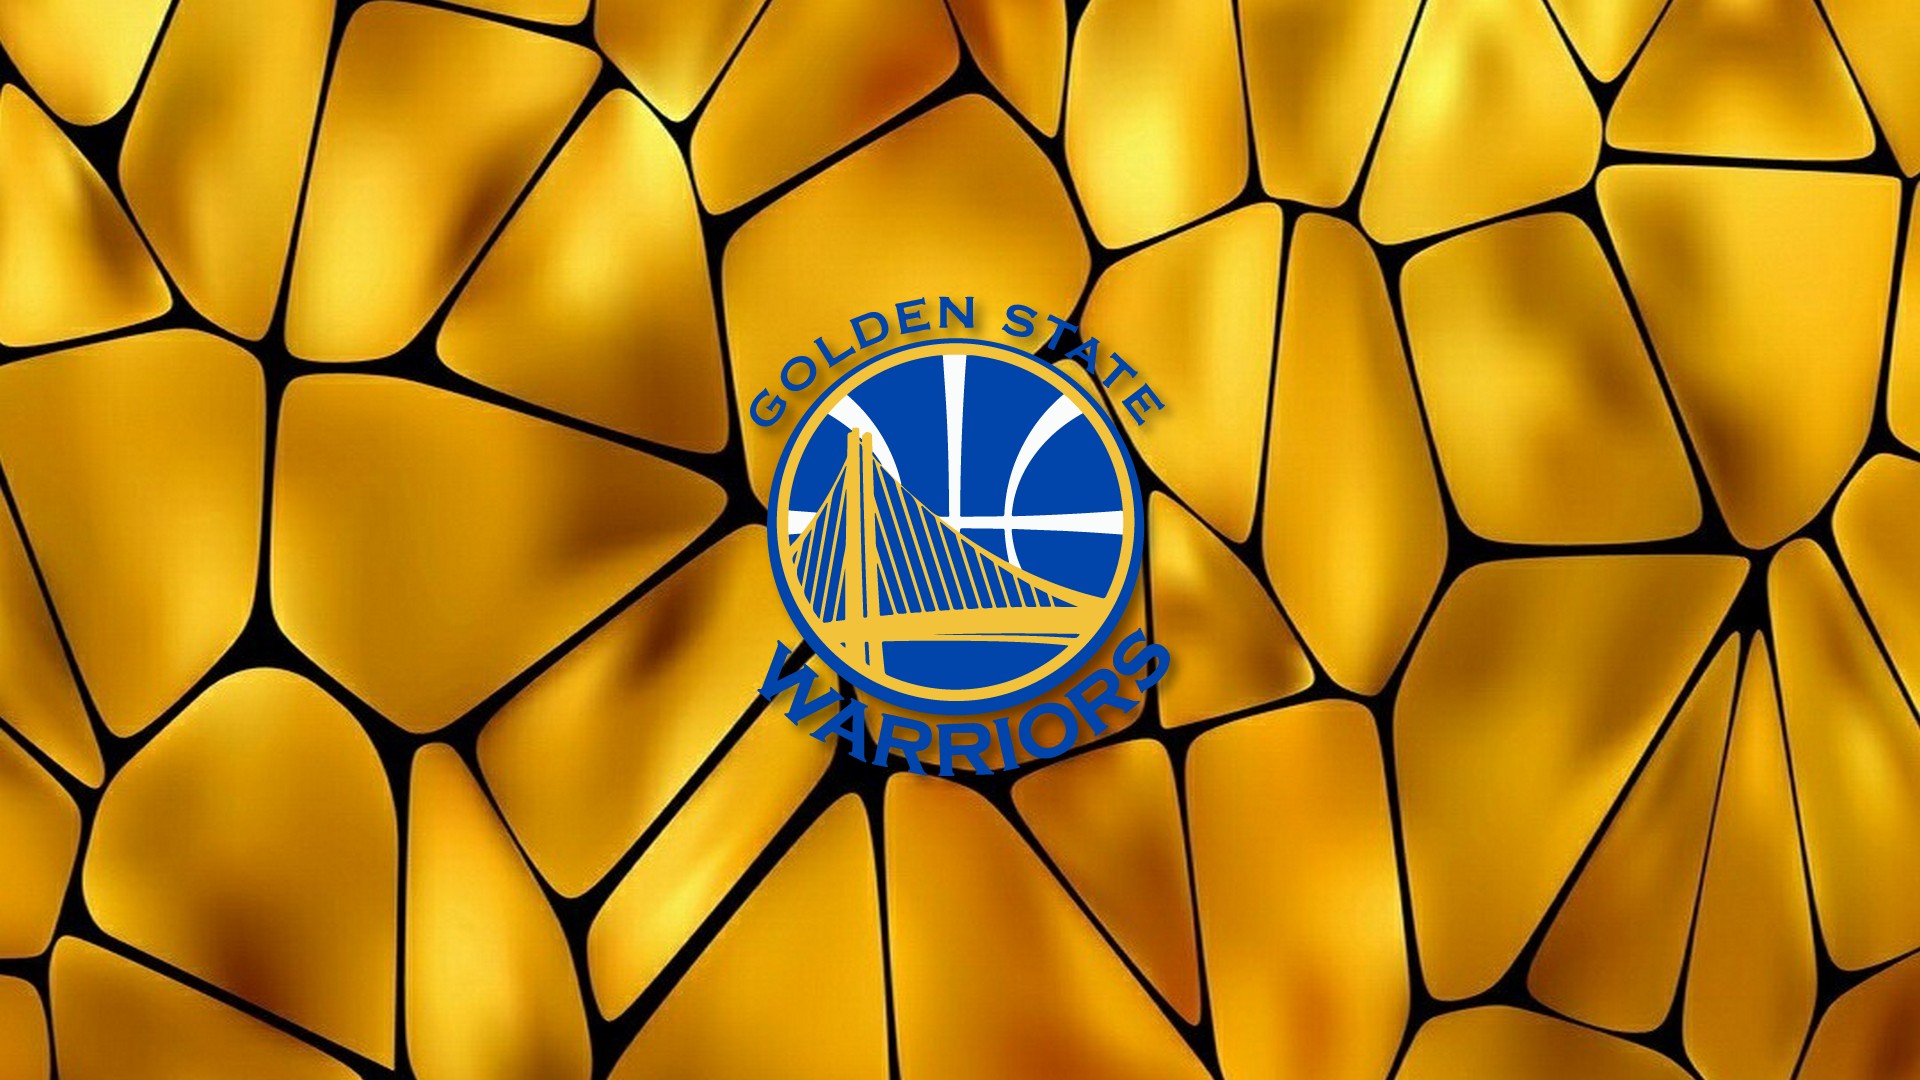 HD Desktop Wallpaper Golden State Warriors Logo with image dimensions 1920x1080 pixel. You can make this wallpaper for your Desktop Computer Backgrounds, Windows or Mac Screensavers, iPhone Lock screen, Tablet or Android and another Mobile Phone device